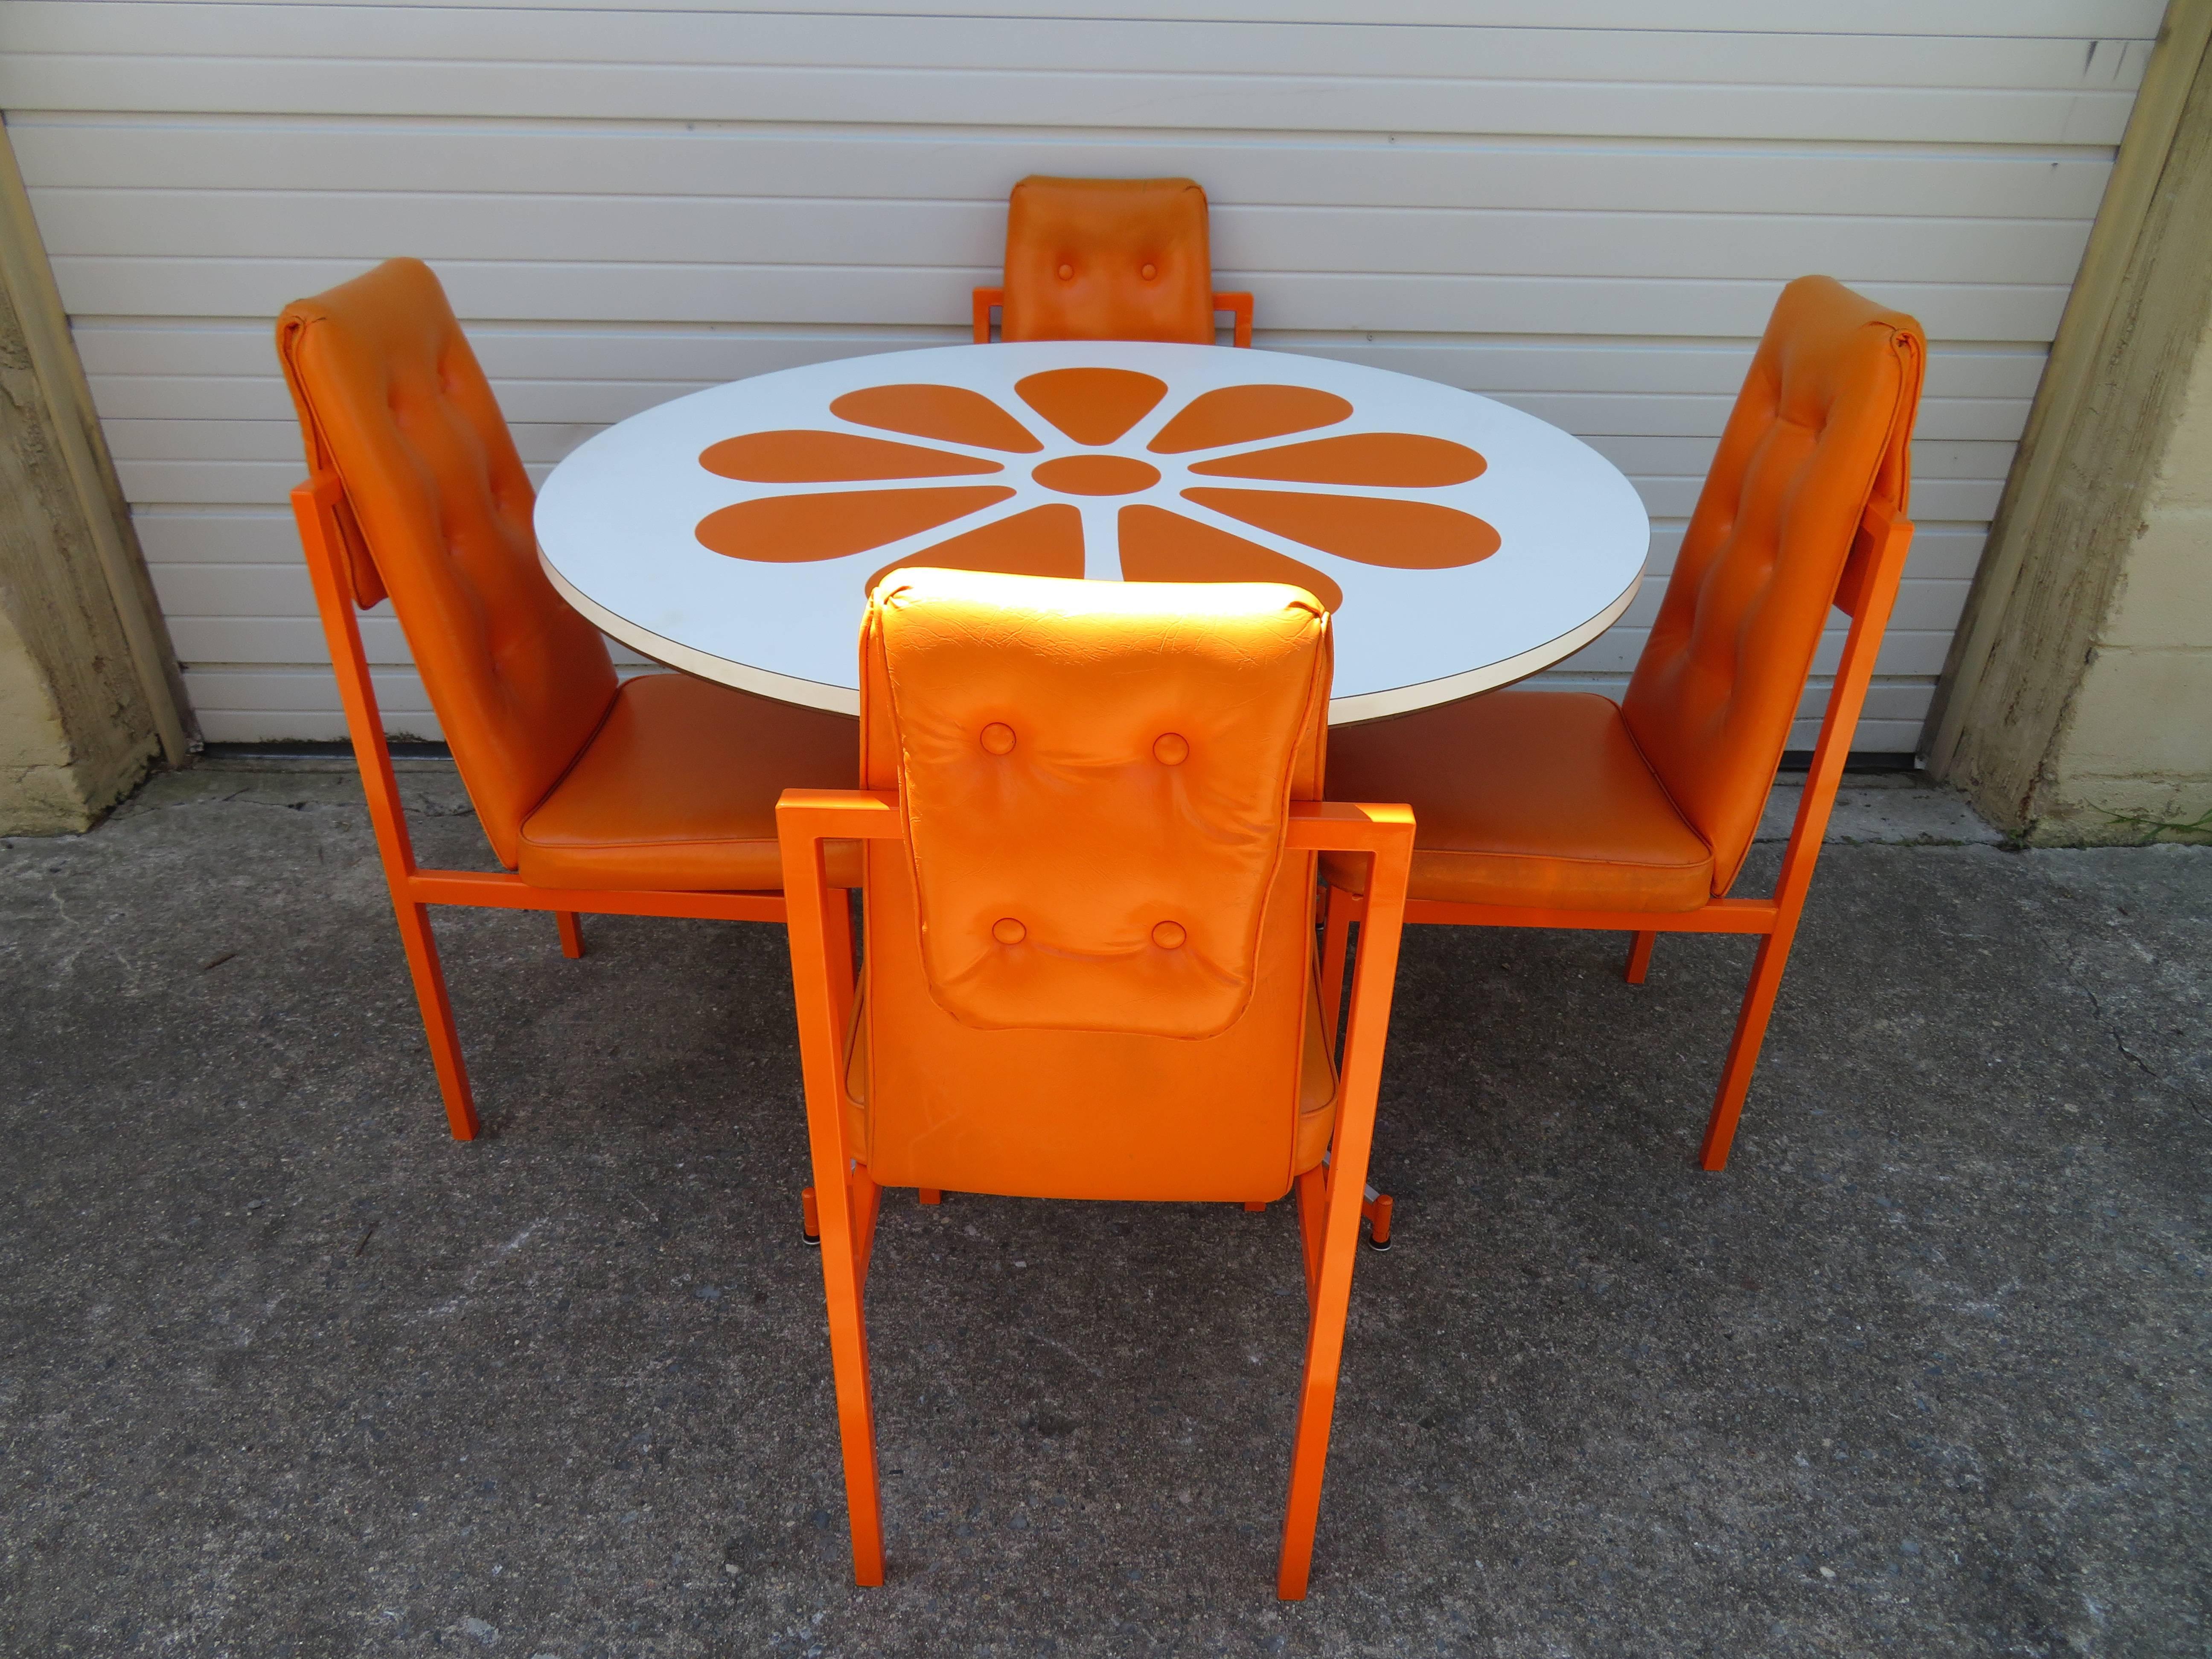 Gorgeous fun set of four dining chairs with matching orange slice flower dining table. All the metal frames have been freshly powder coated in the same exact color they originally were. We did not reupholster the seat pads and decided to leave that